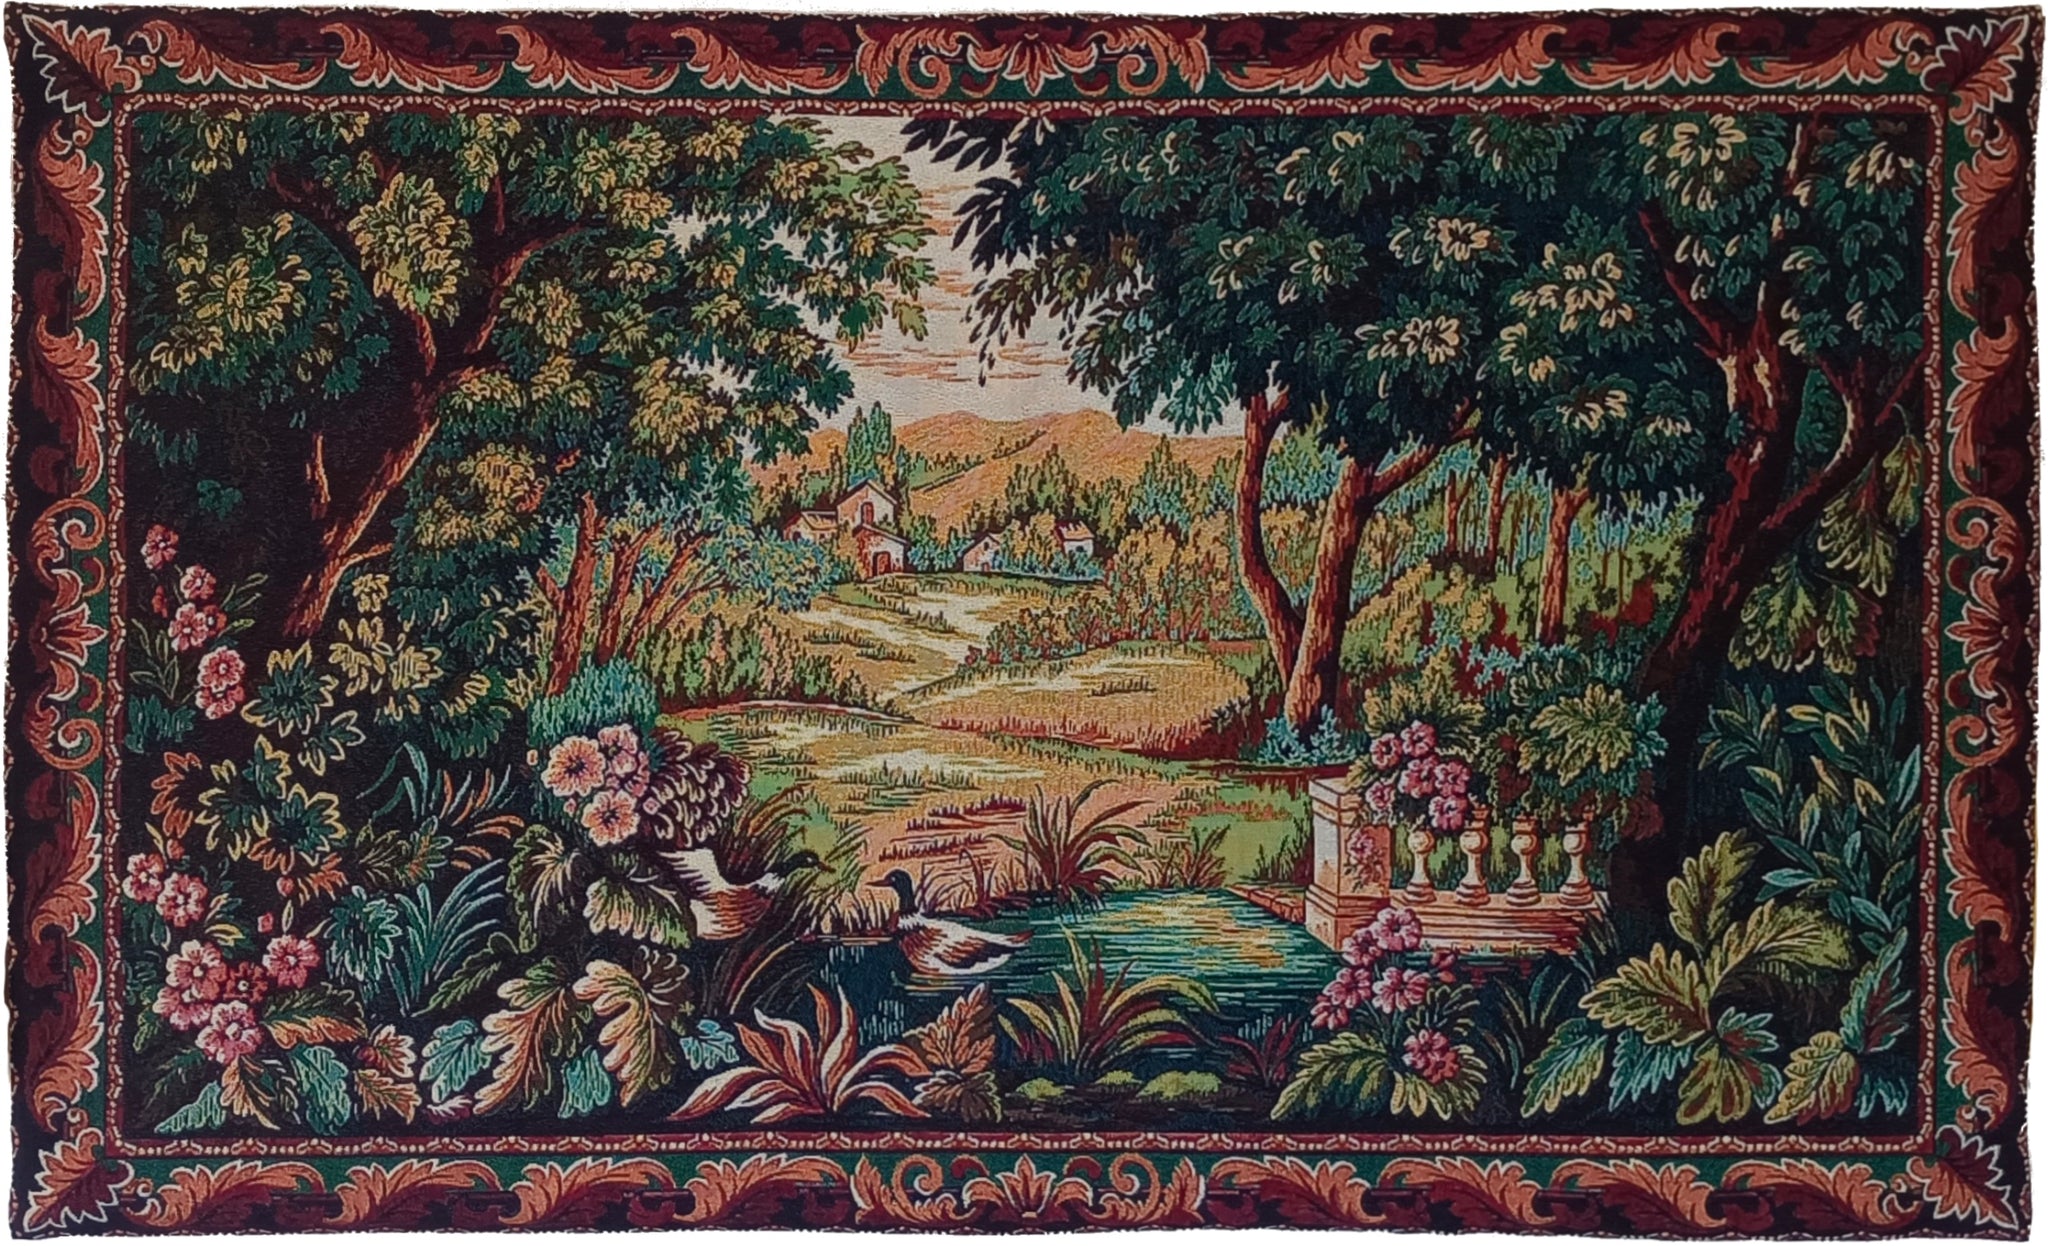 WH-FLD-VERDRE&FIELD - Wall Hanging-Flemish-Verdure and Field W142 x H88 CM (W56 x H34 INCH)